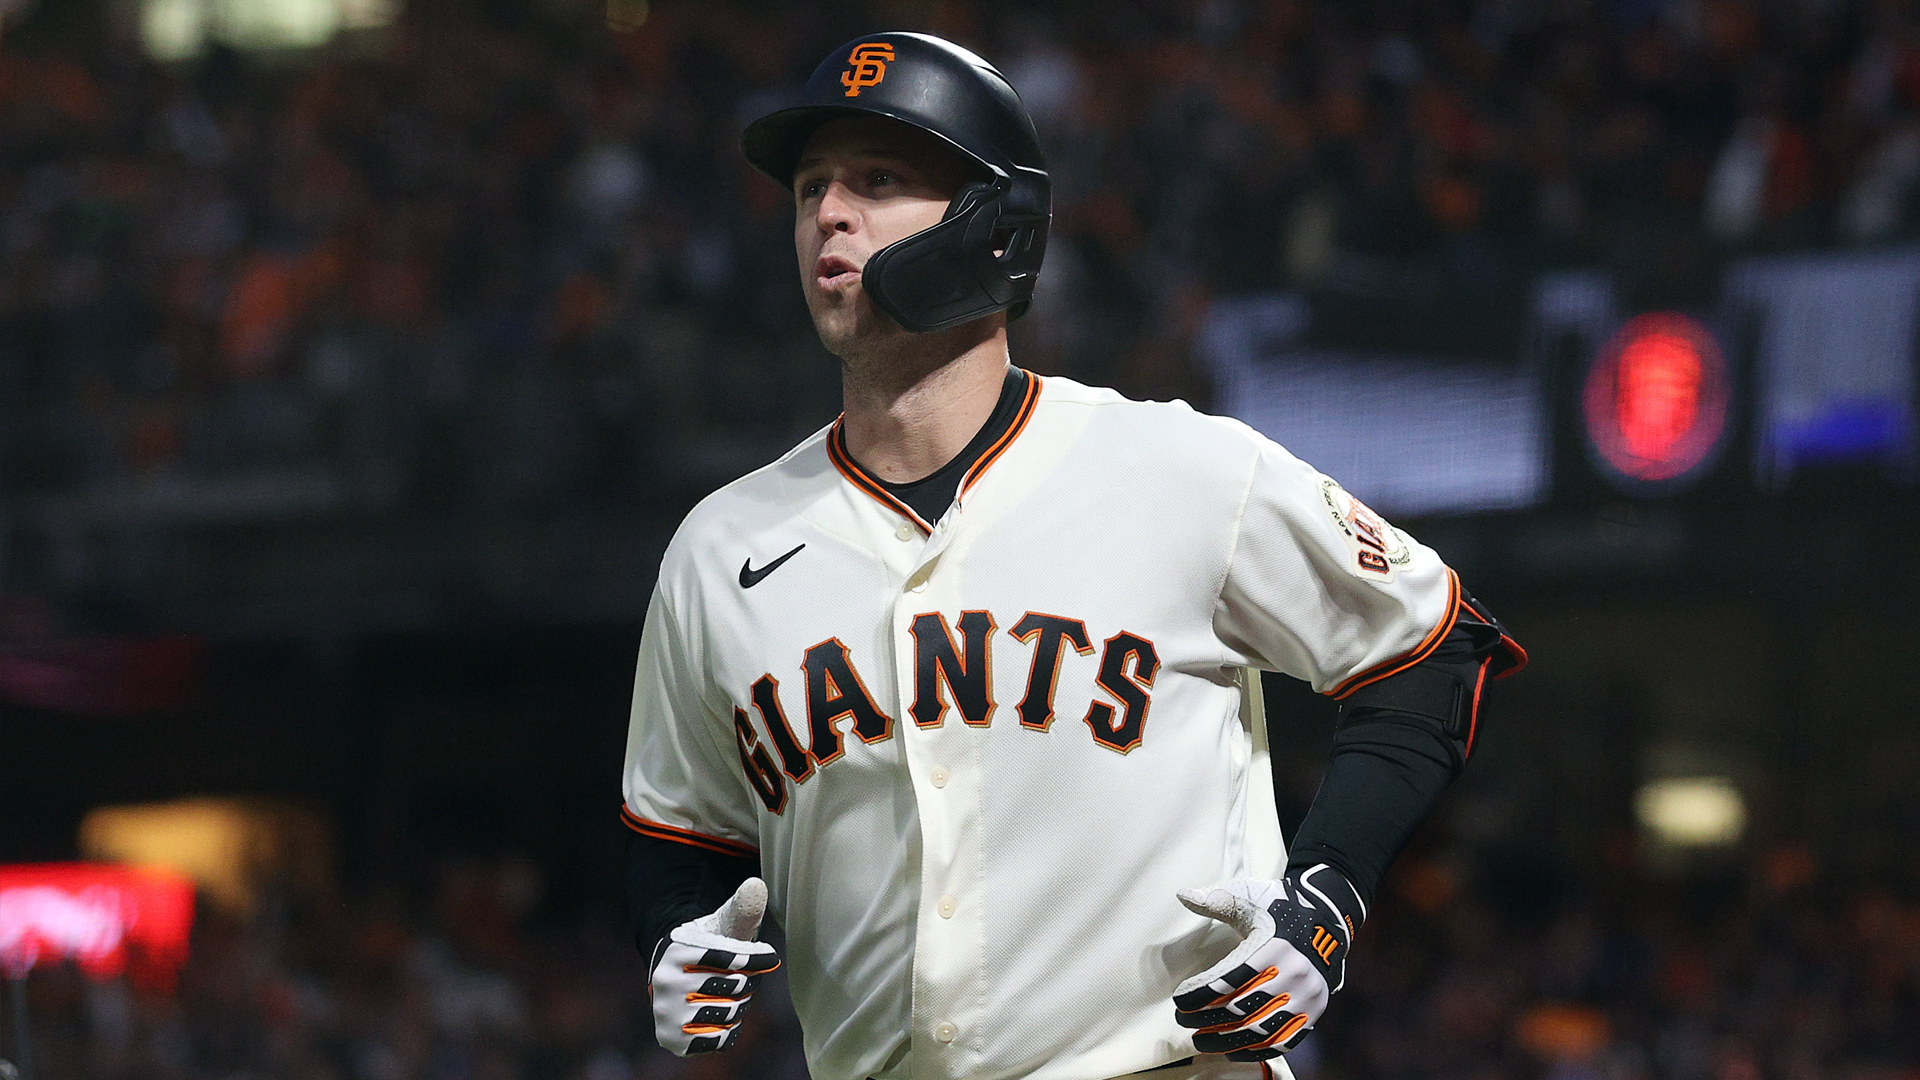 Buster Posey honored by Giants